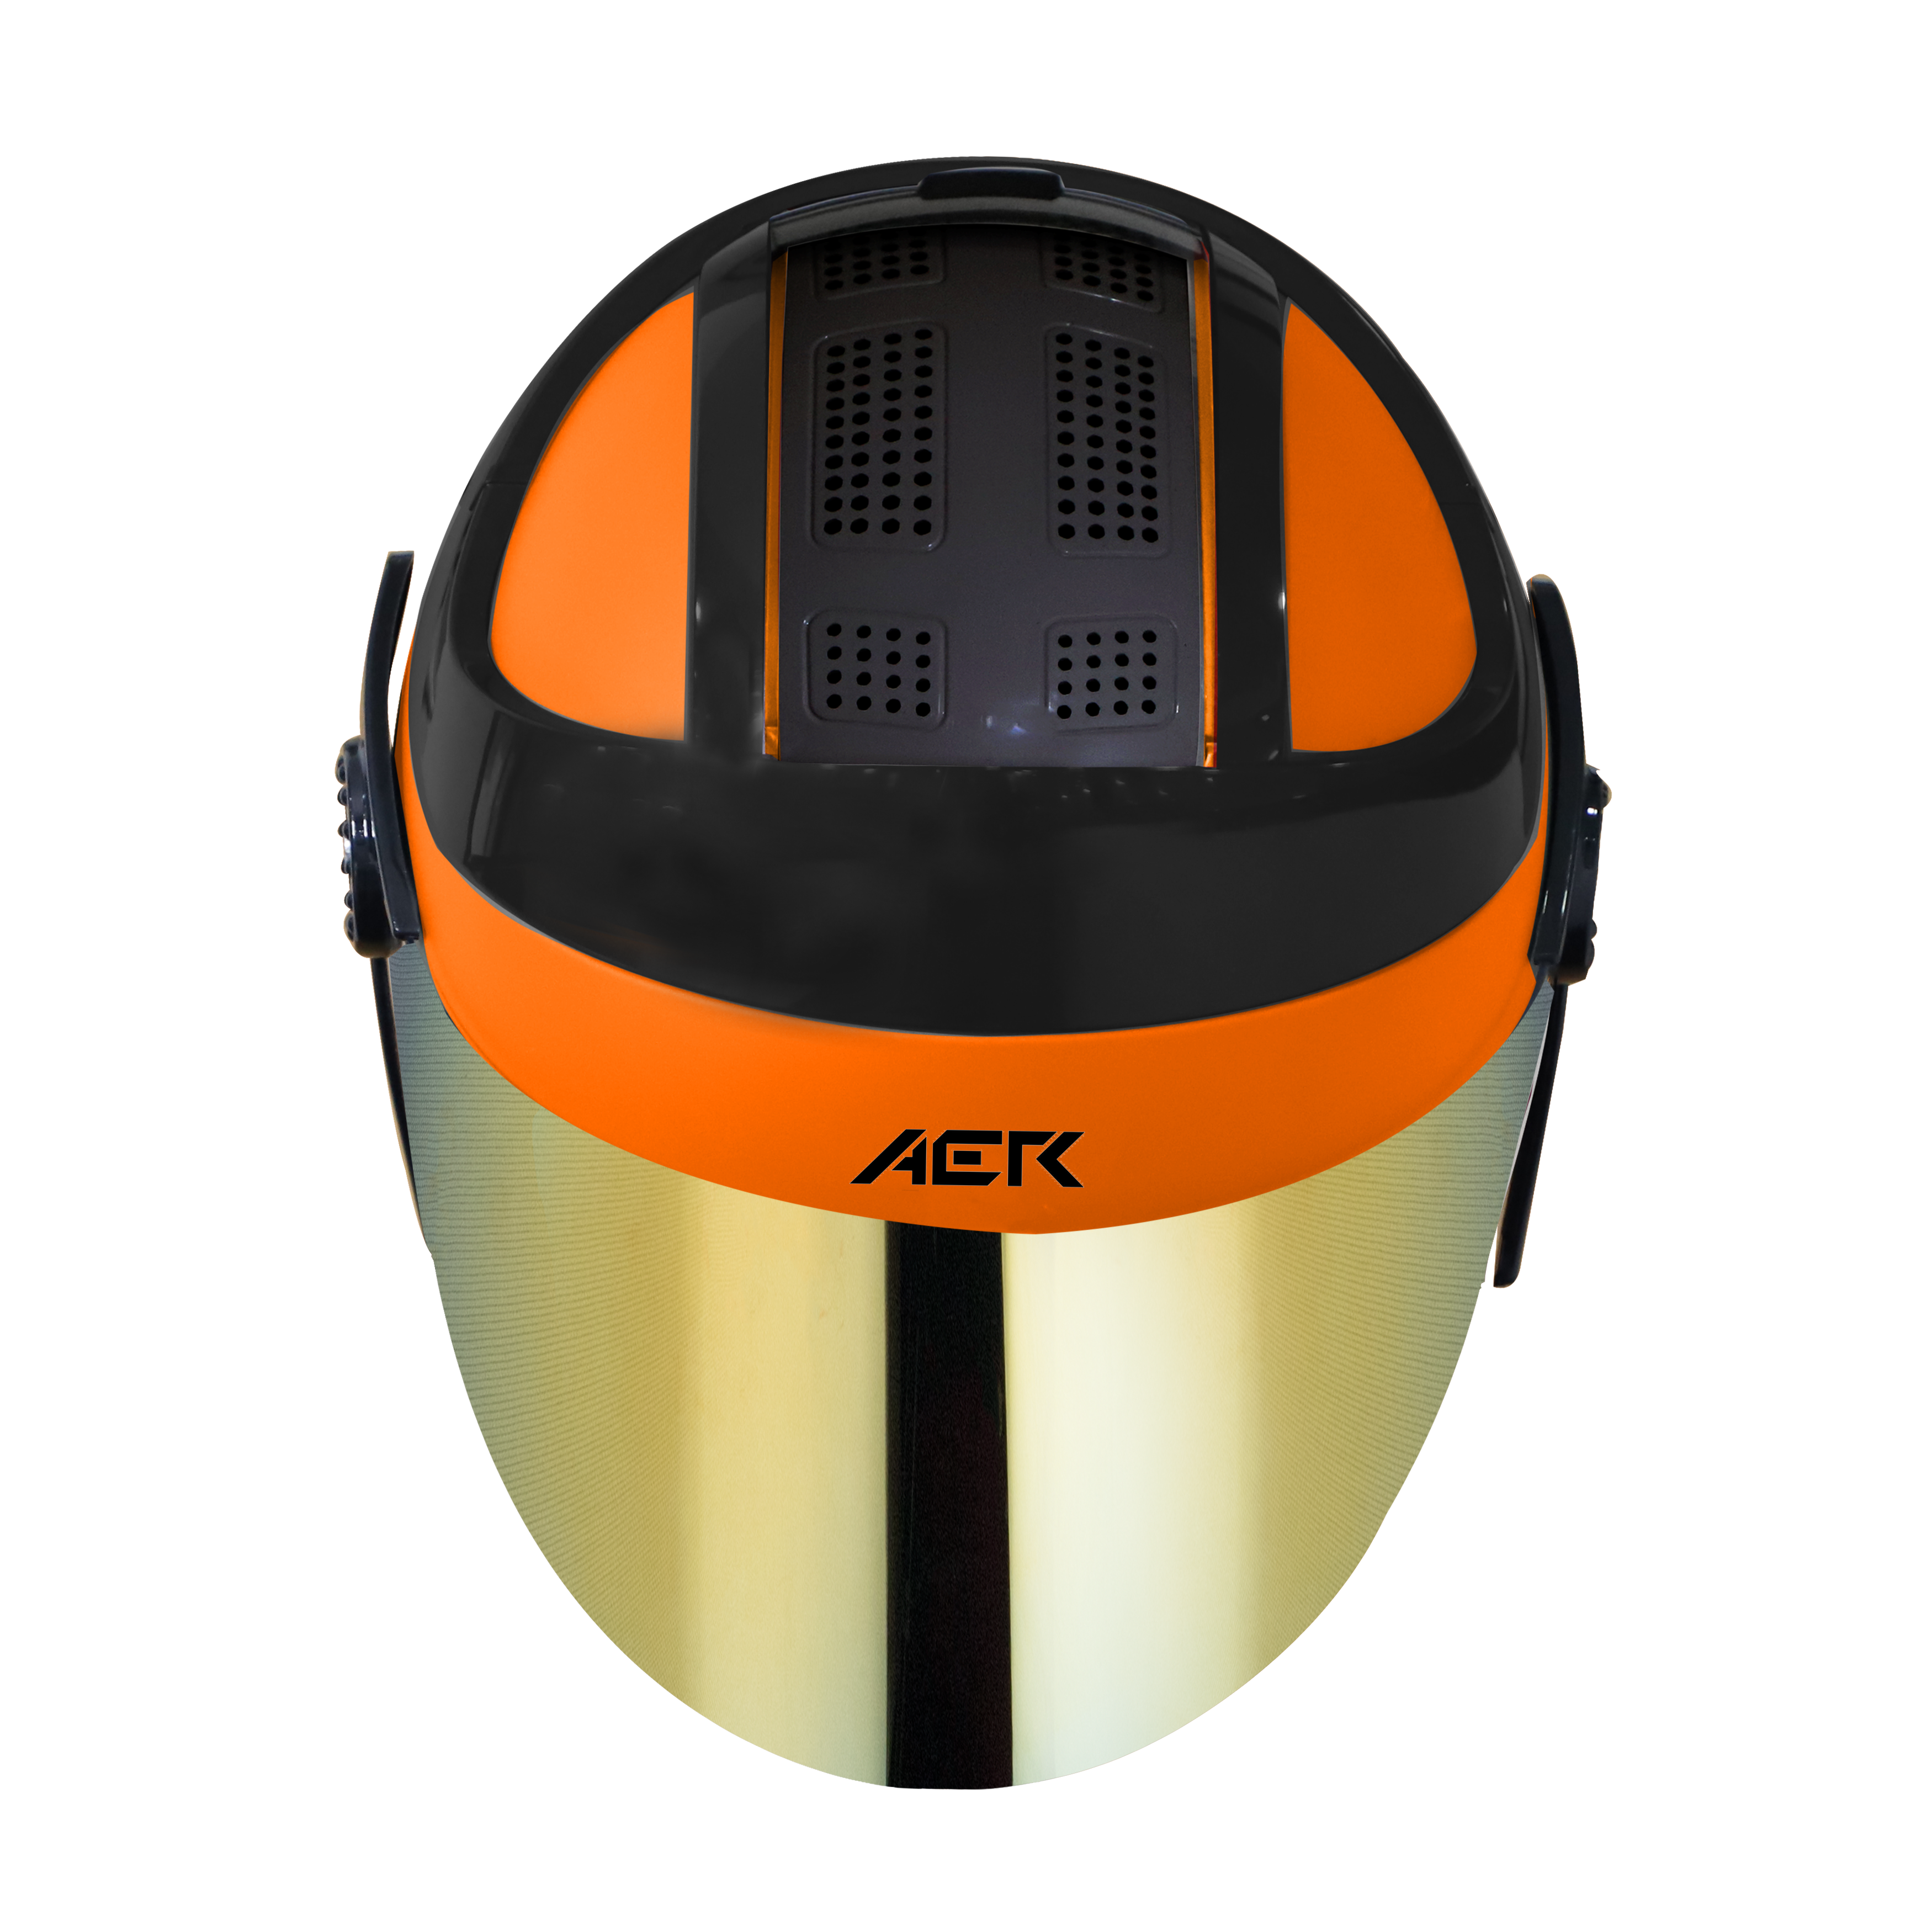 SB-29 AER GLOSSY FLUO ORANGE WITH BLACK ( FITTED WITH CLEAR VISOR WITH EXTRA GOLD CHROME VISOR FREE)